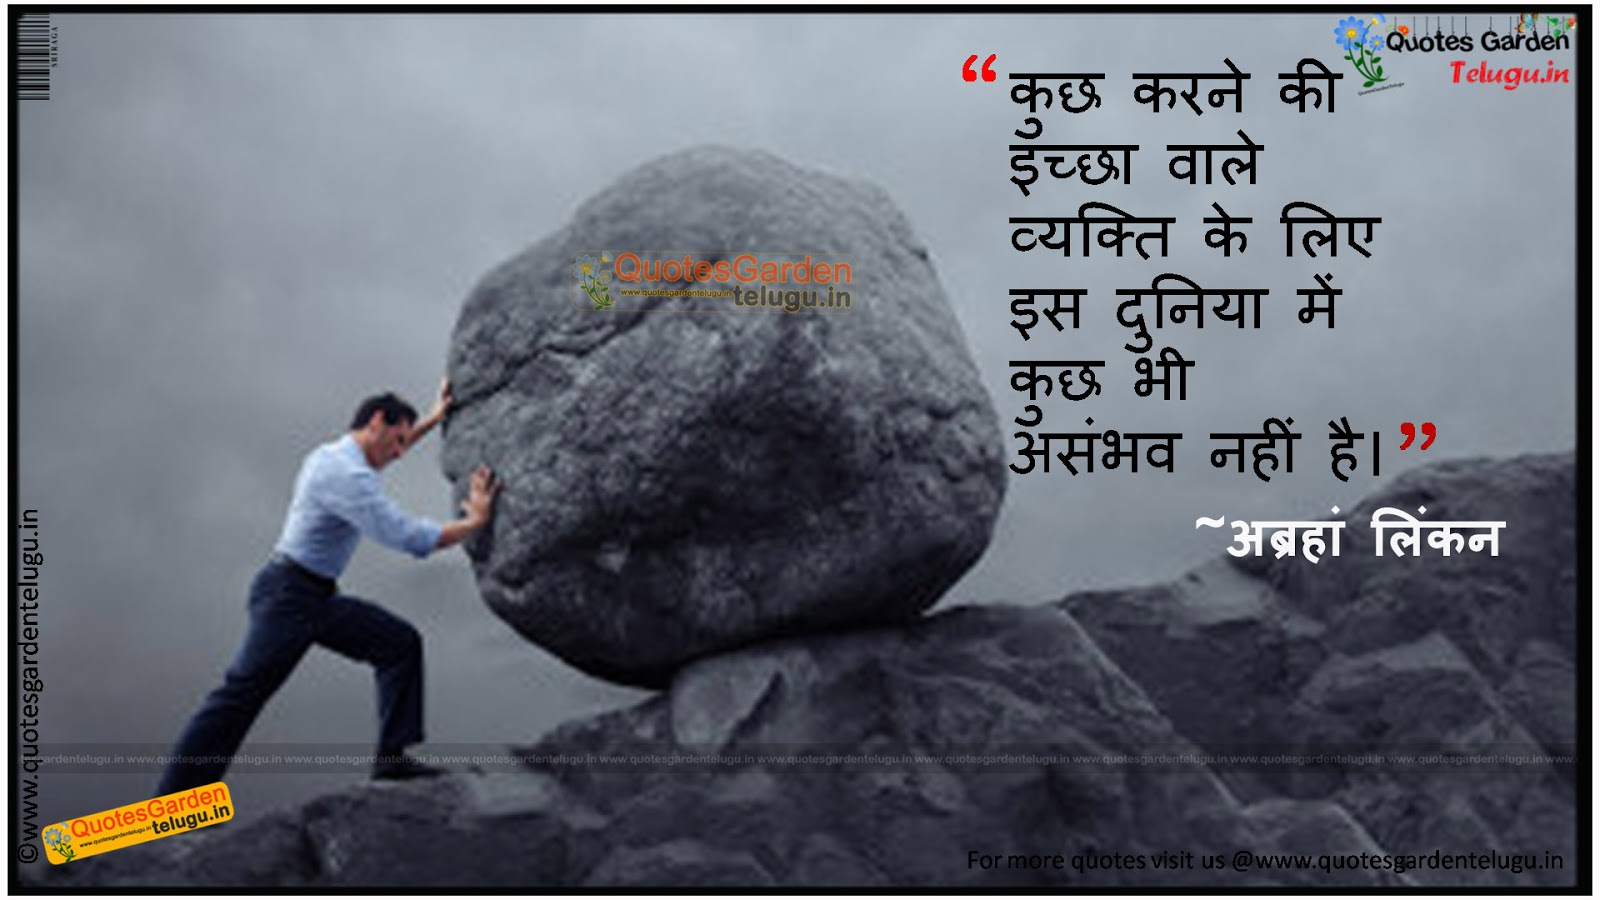 Summary 65 Best Inspirational And Motivational Quotes In Hindi